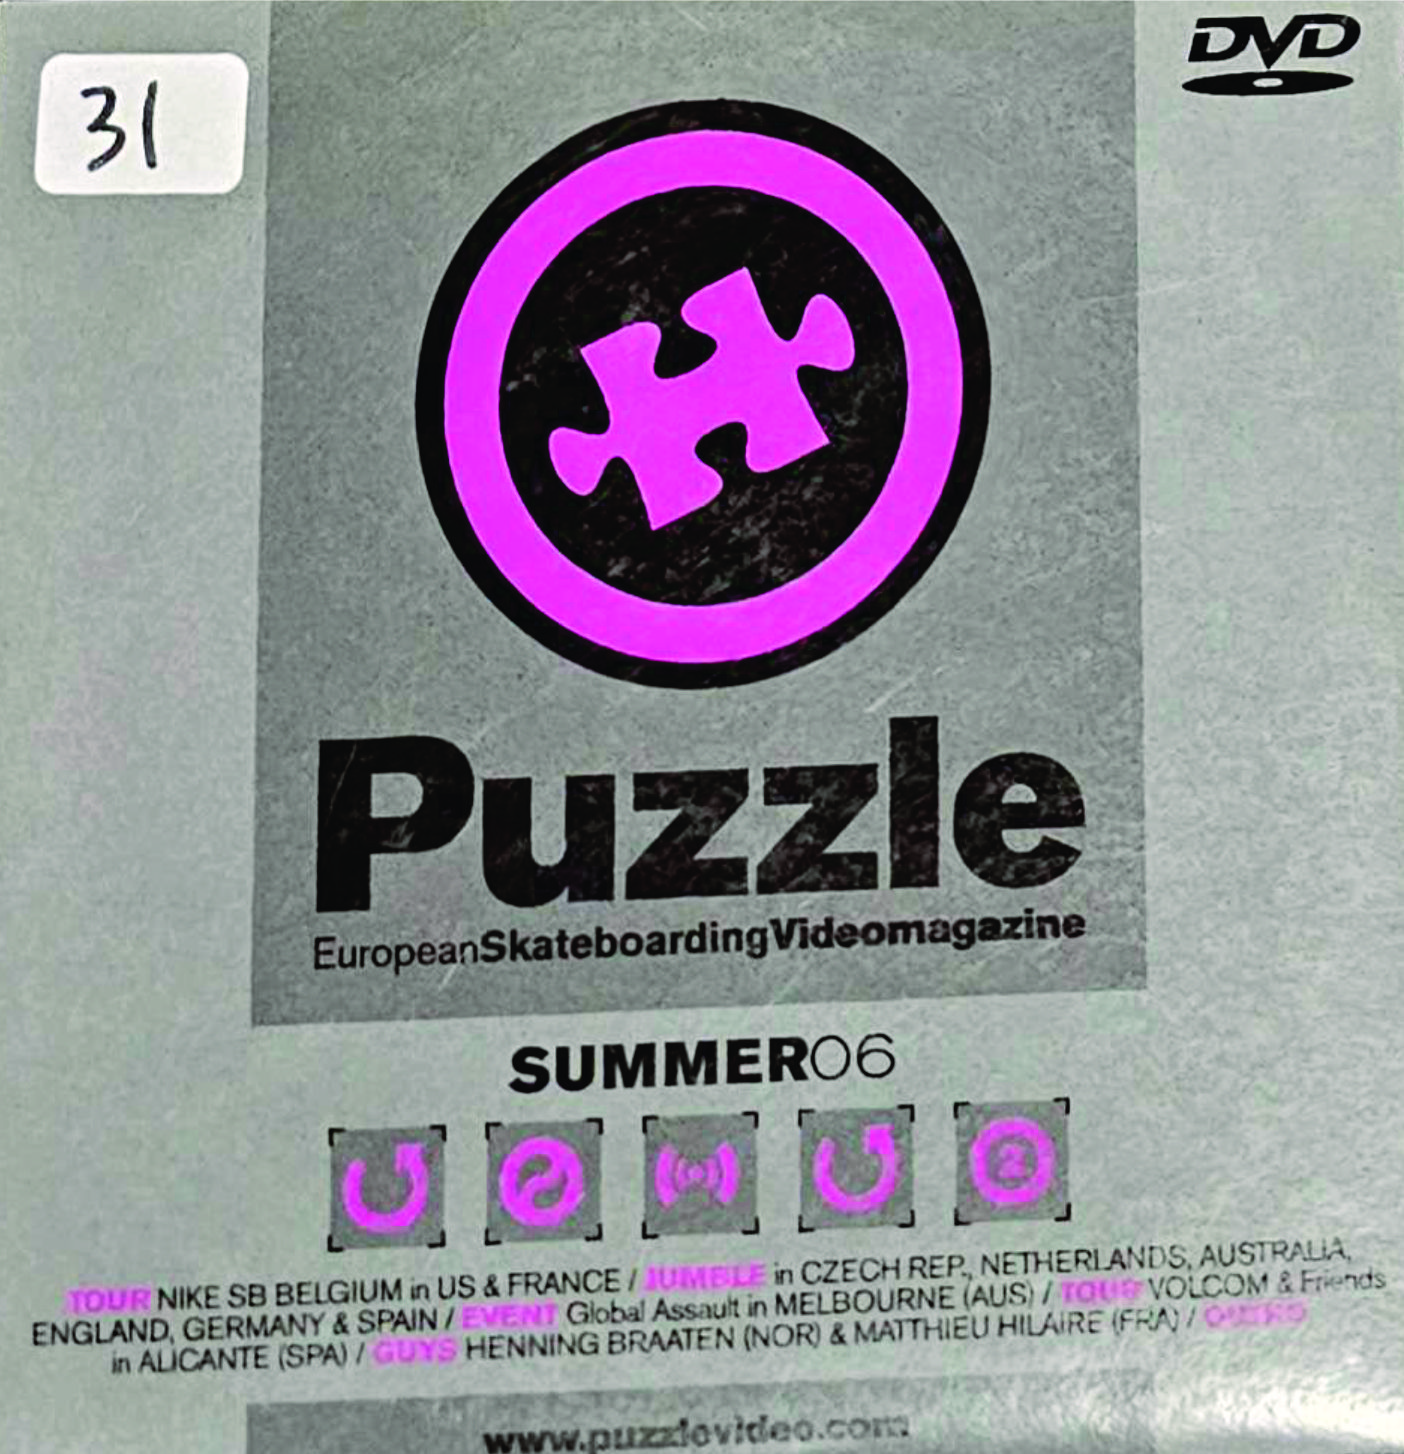 Puzzle Video - Summer 2006 cover